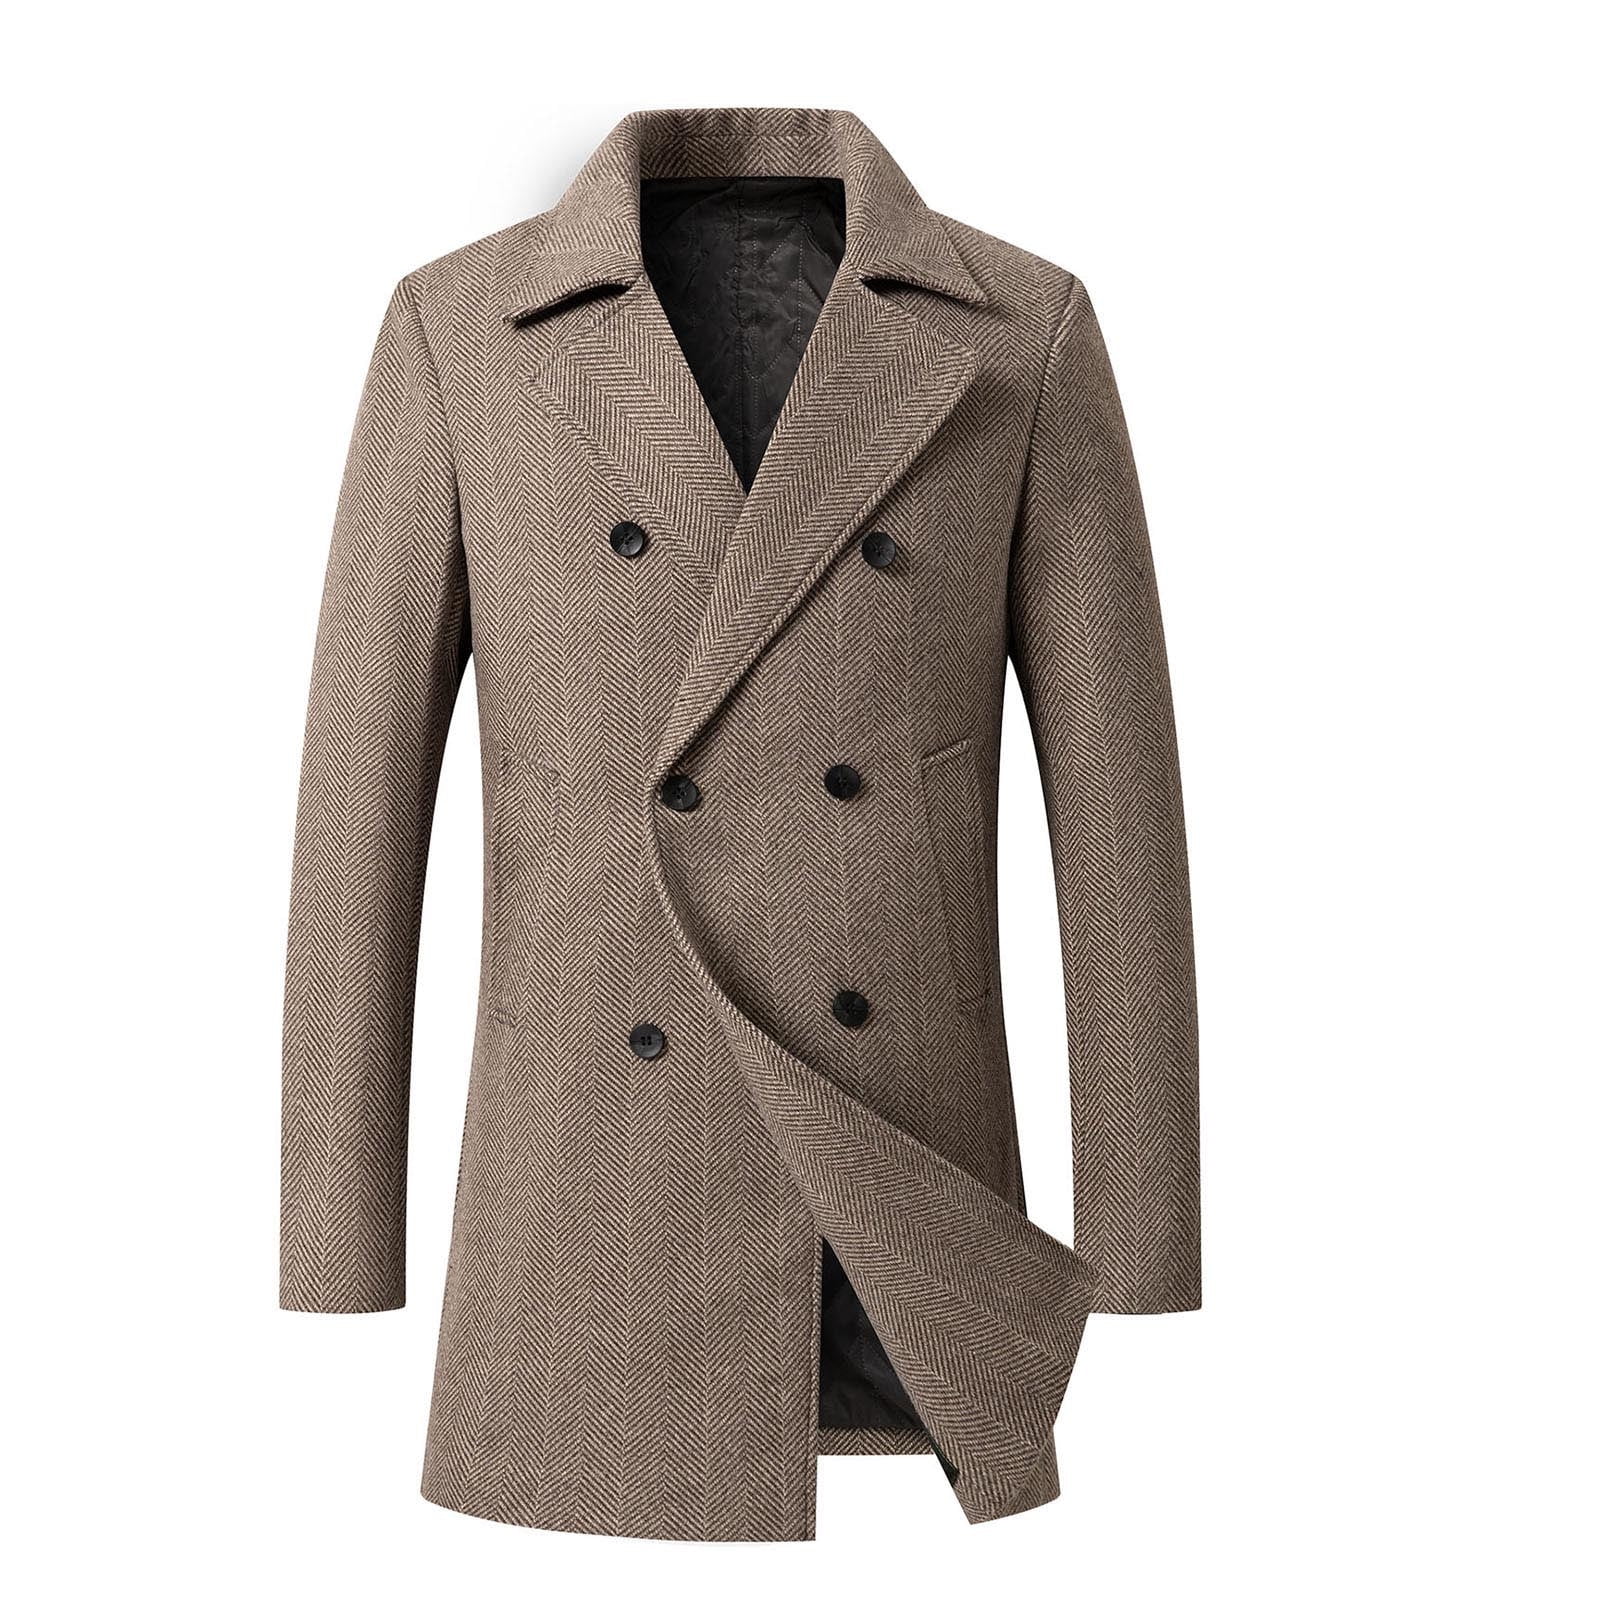 Leesechin Winter Jackets for Men Big and Tall Business Woolen Coat Fashion  Double Breasted Lapel Mid Length Coat Coat 